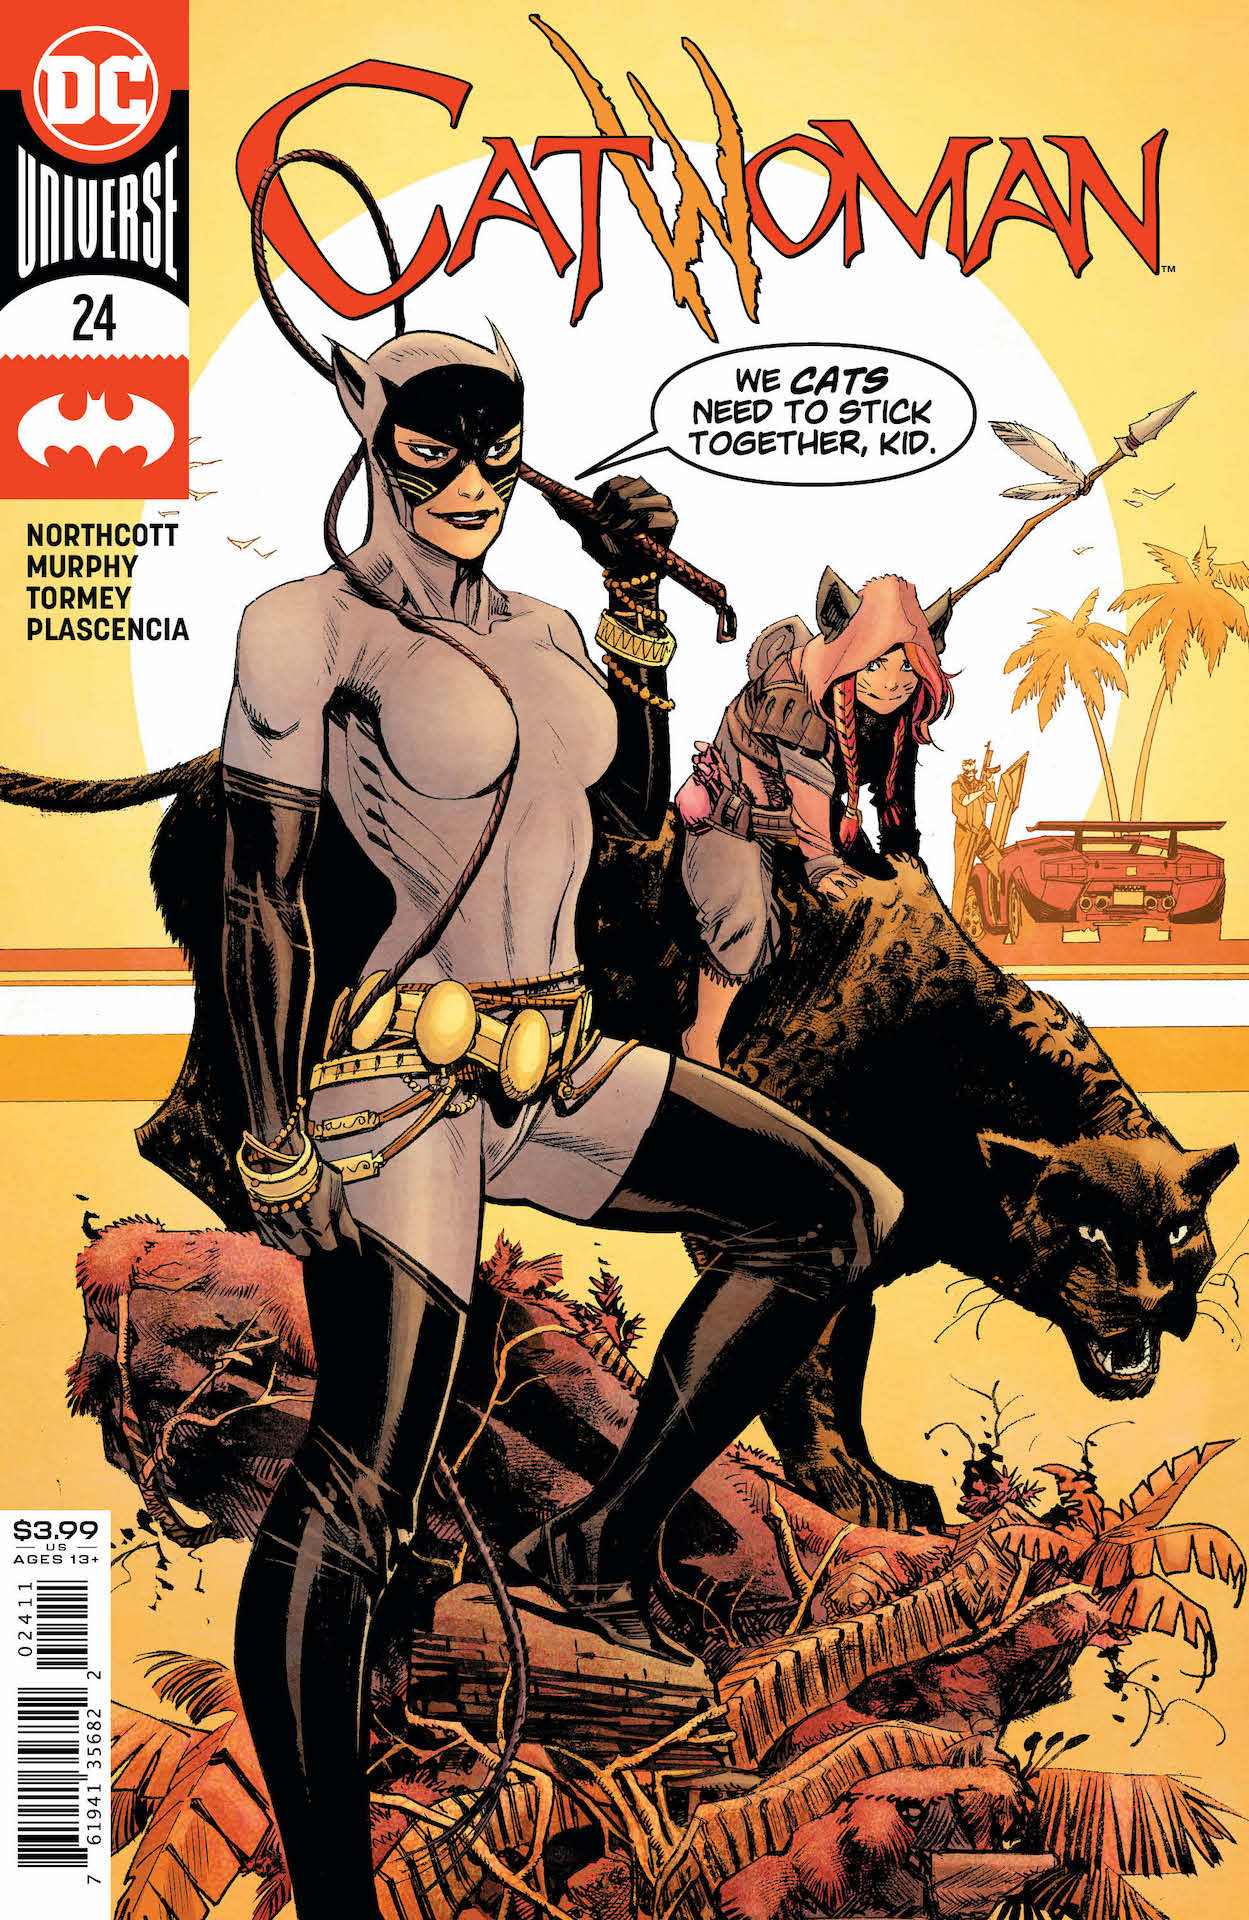 DC Preview: Catwoman #24